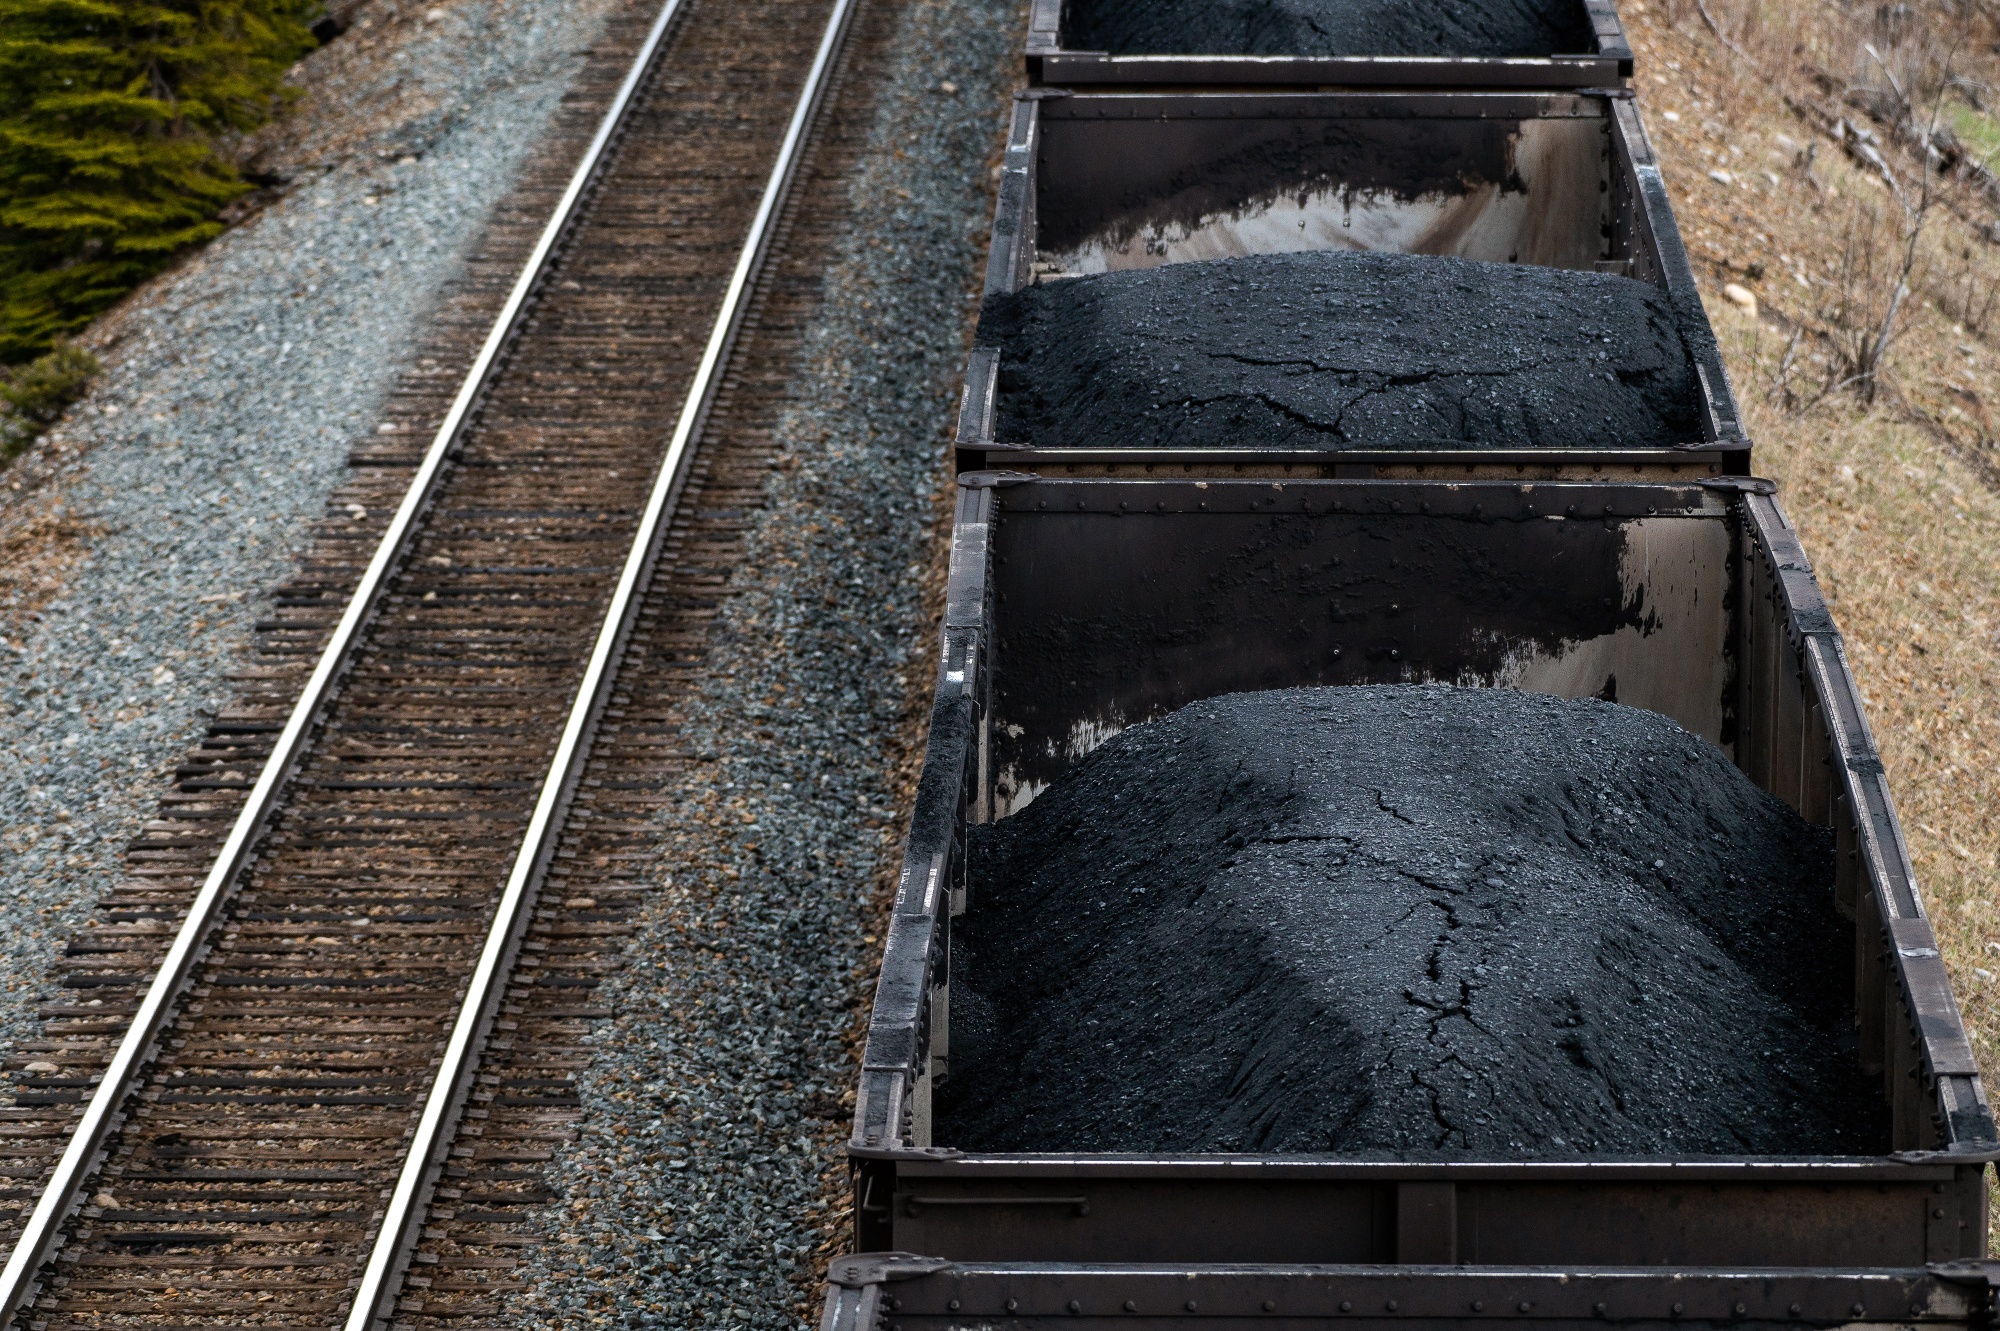 Glencore Receives Canadian Approval for Teck Resources Coal Acquisition